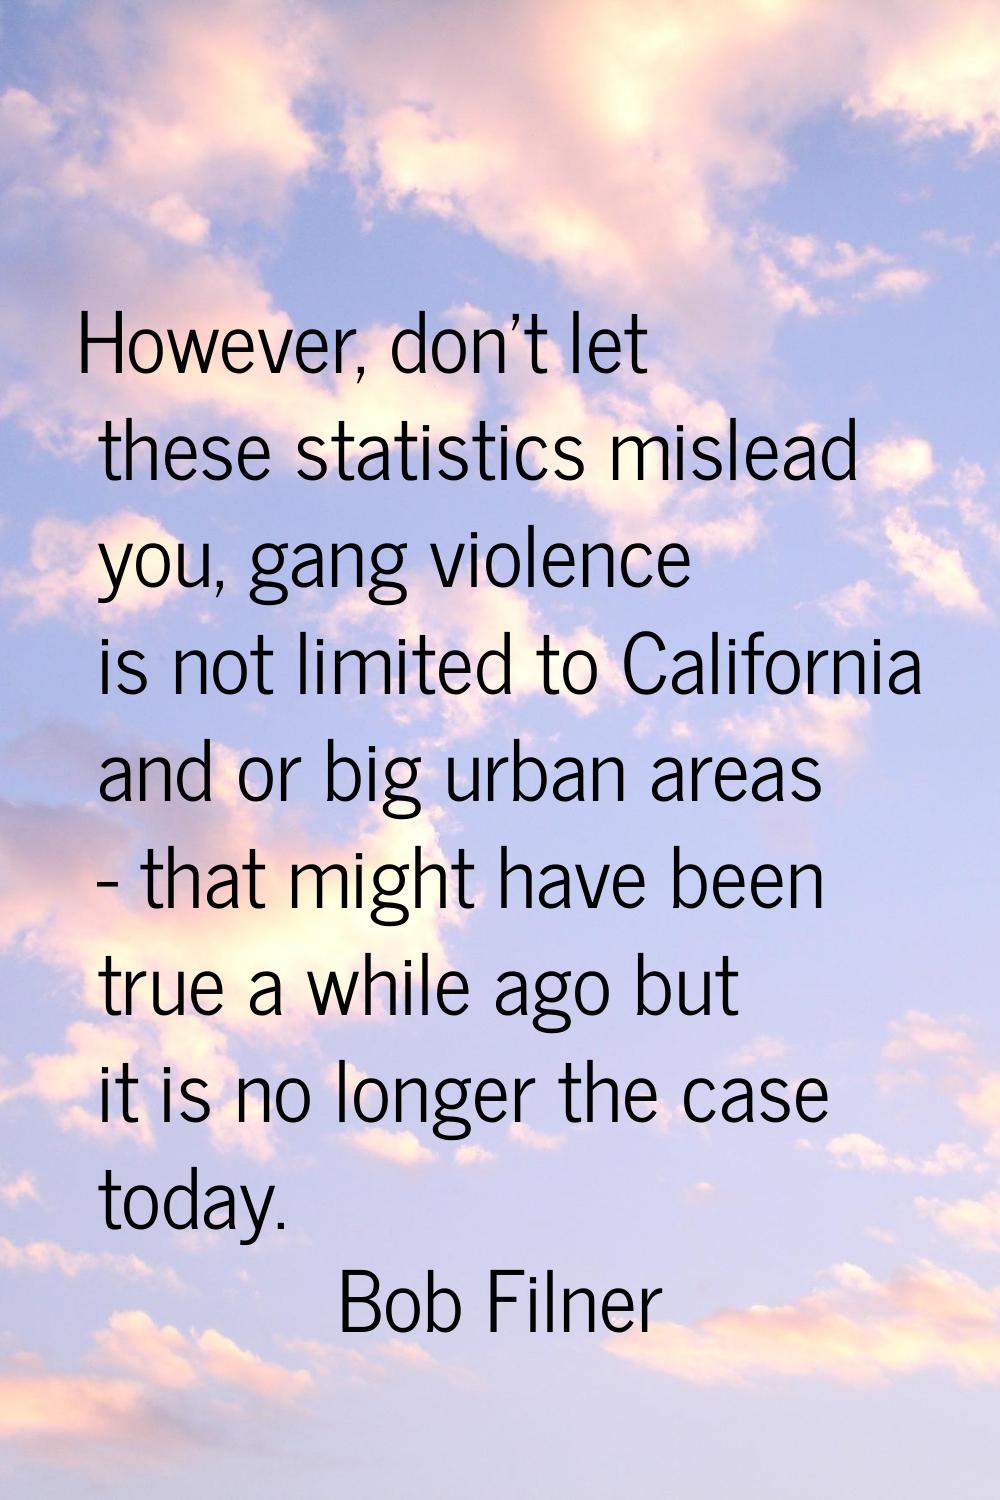 However, don't let these statistics mislead you, gang violence is not limited to California and or 